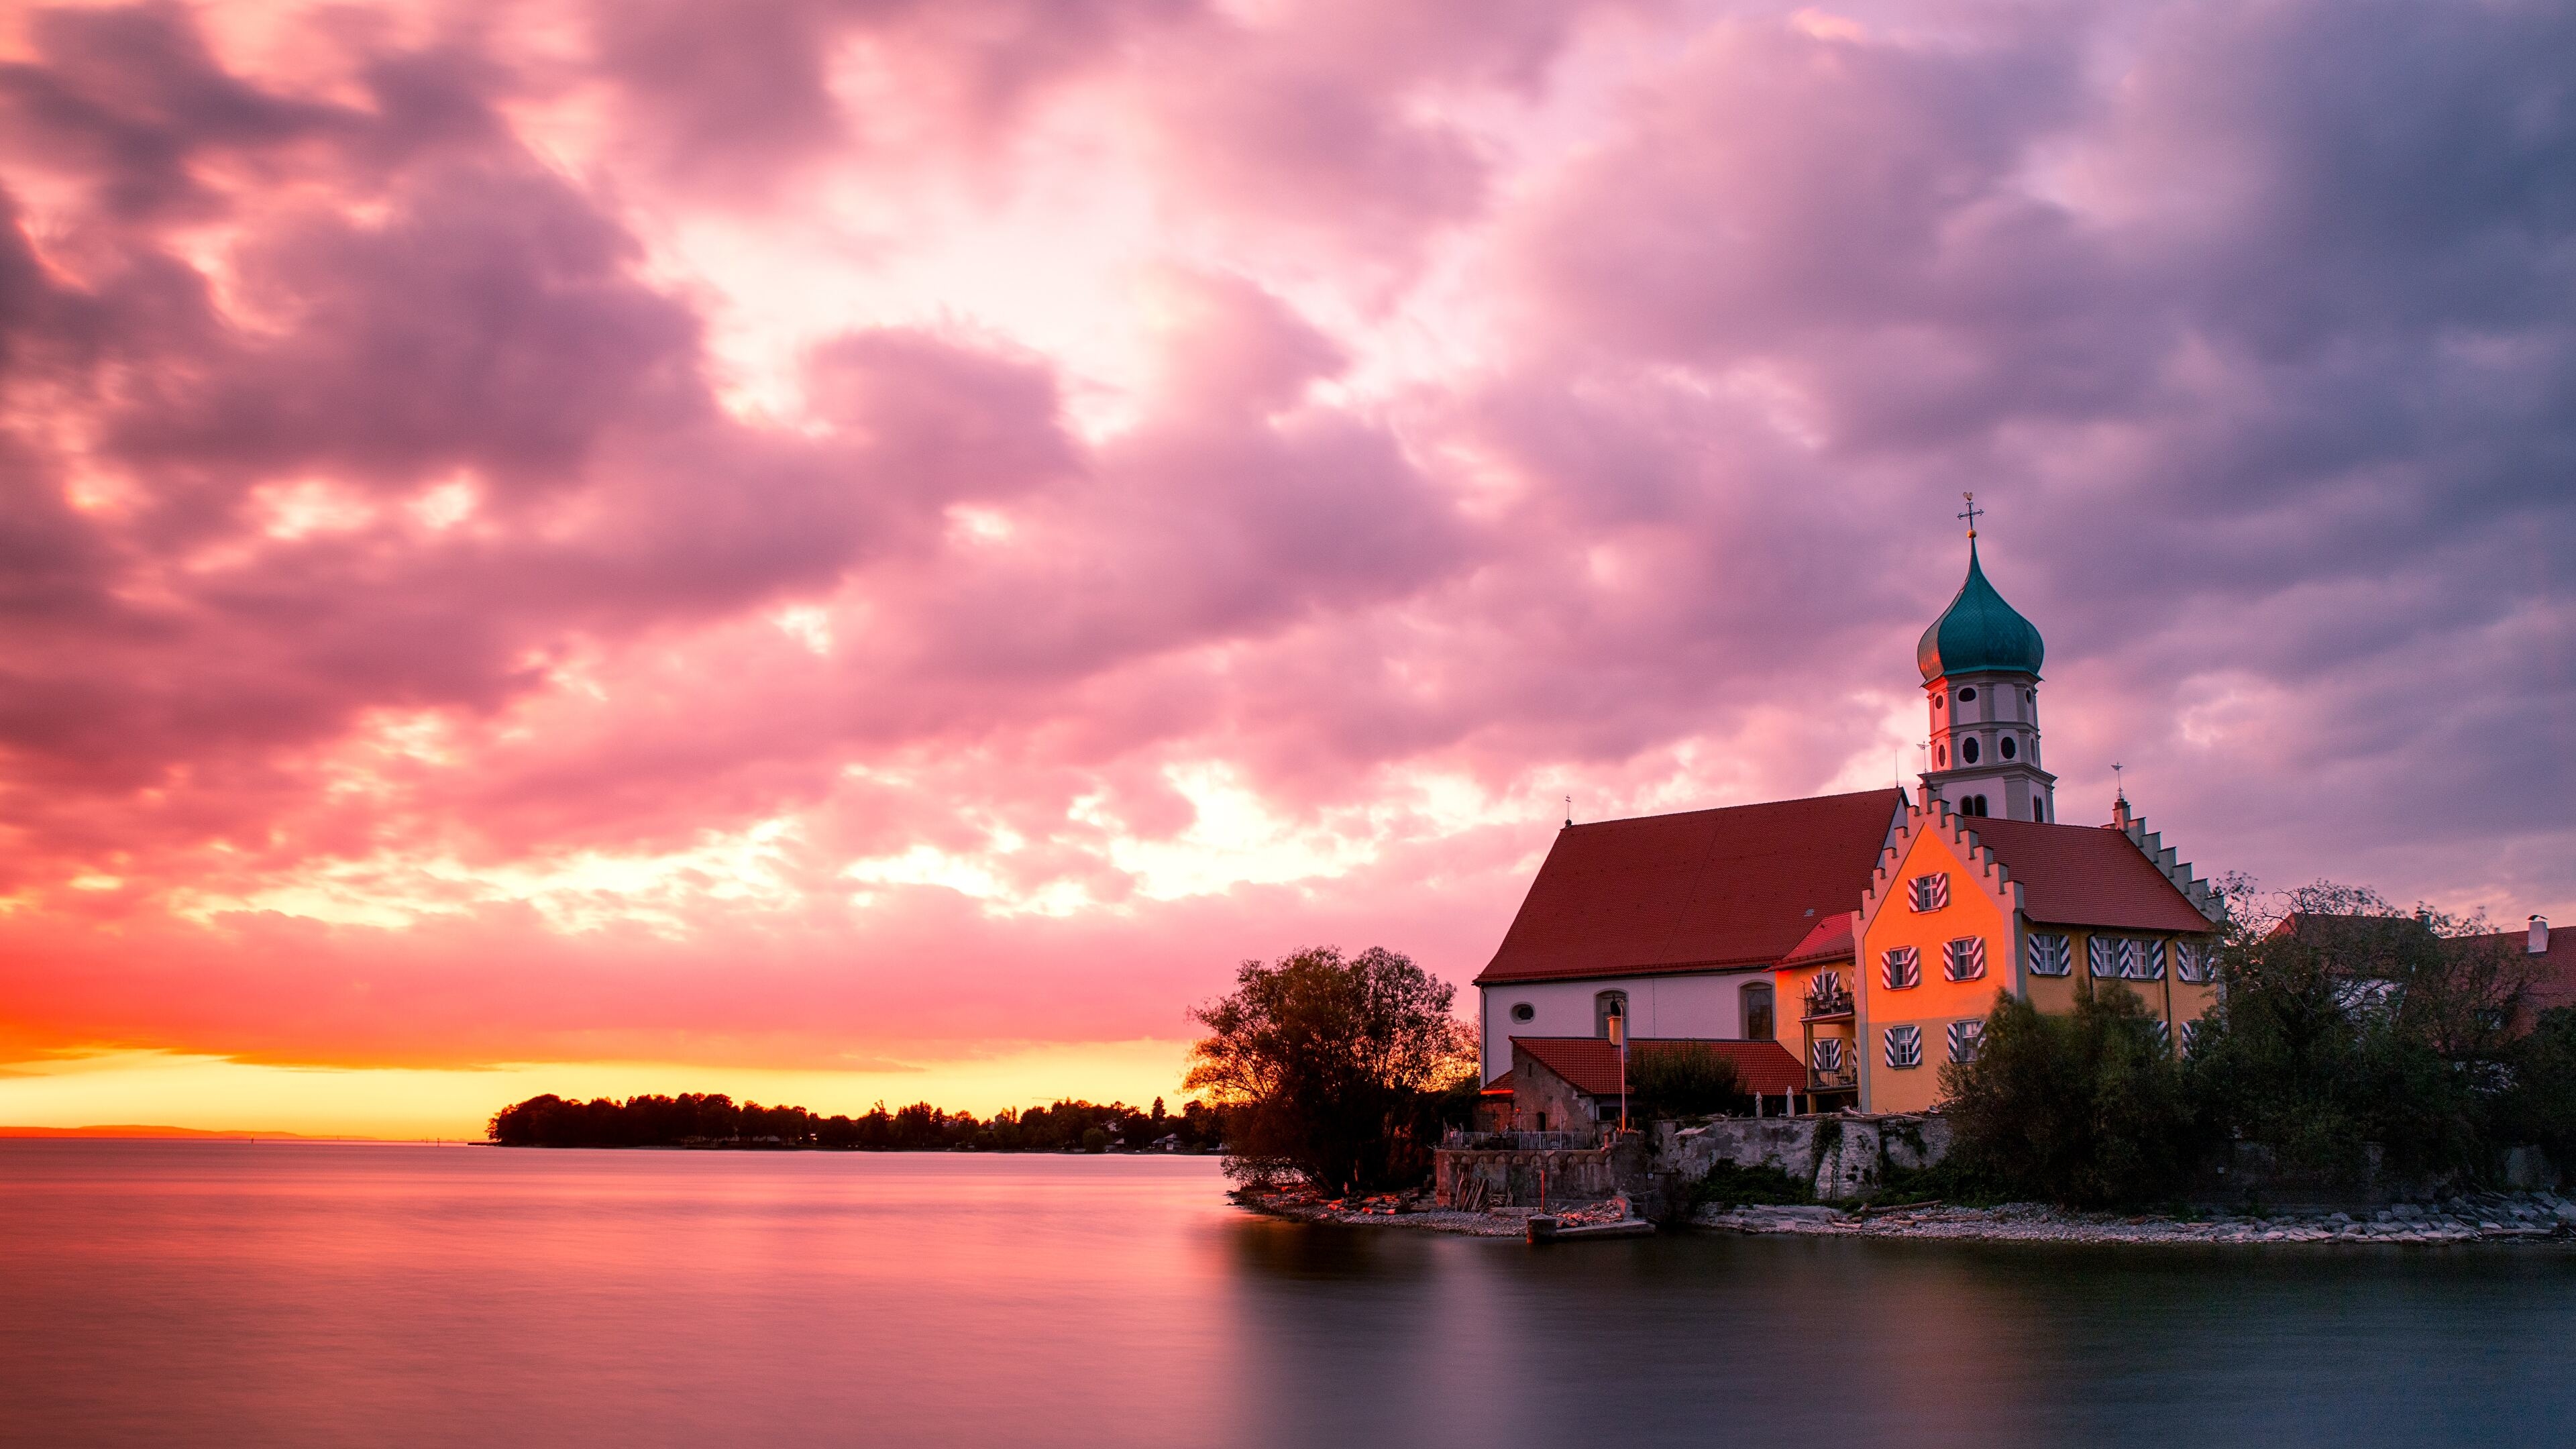 Bodensee in Germany Wallpaper, HD City 4K Wallpaper, Image